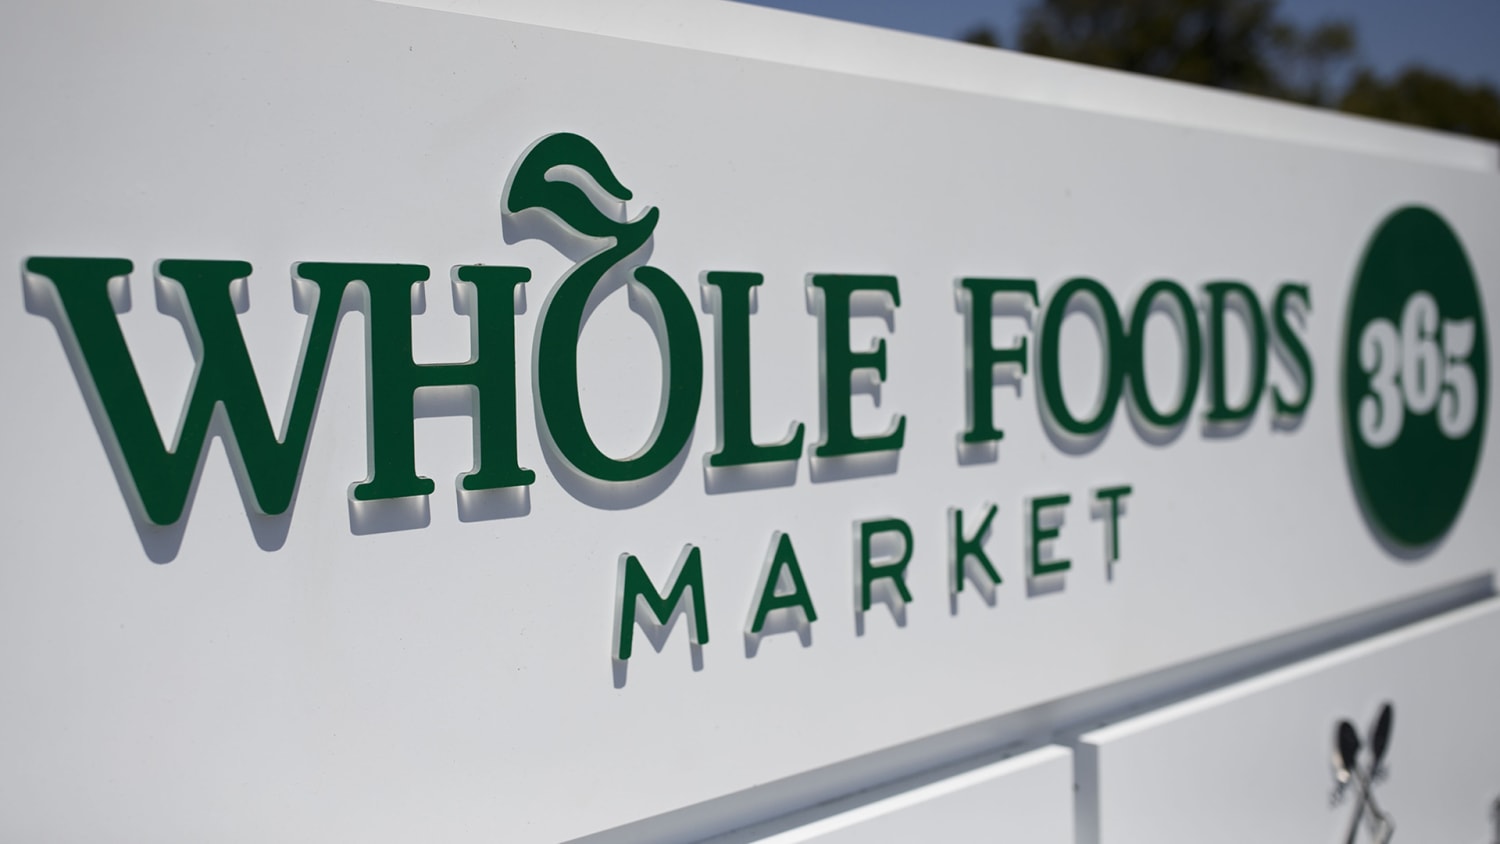  Prime Benefits at Whole Foods Market